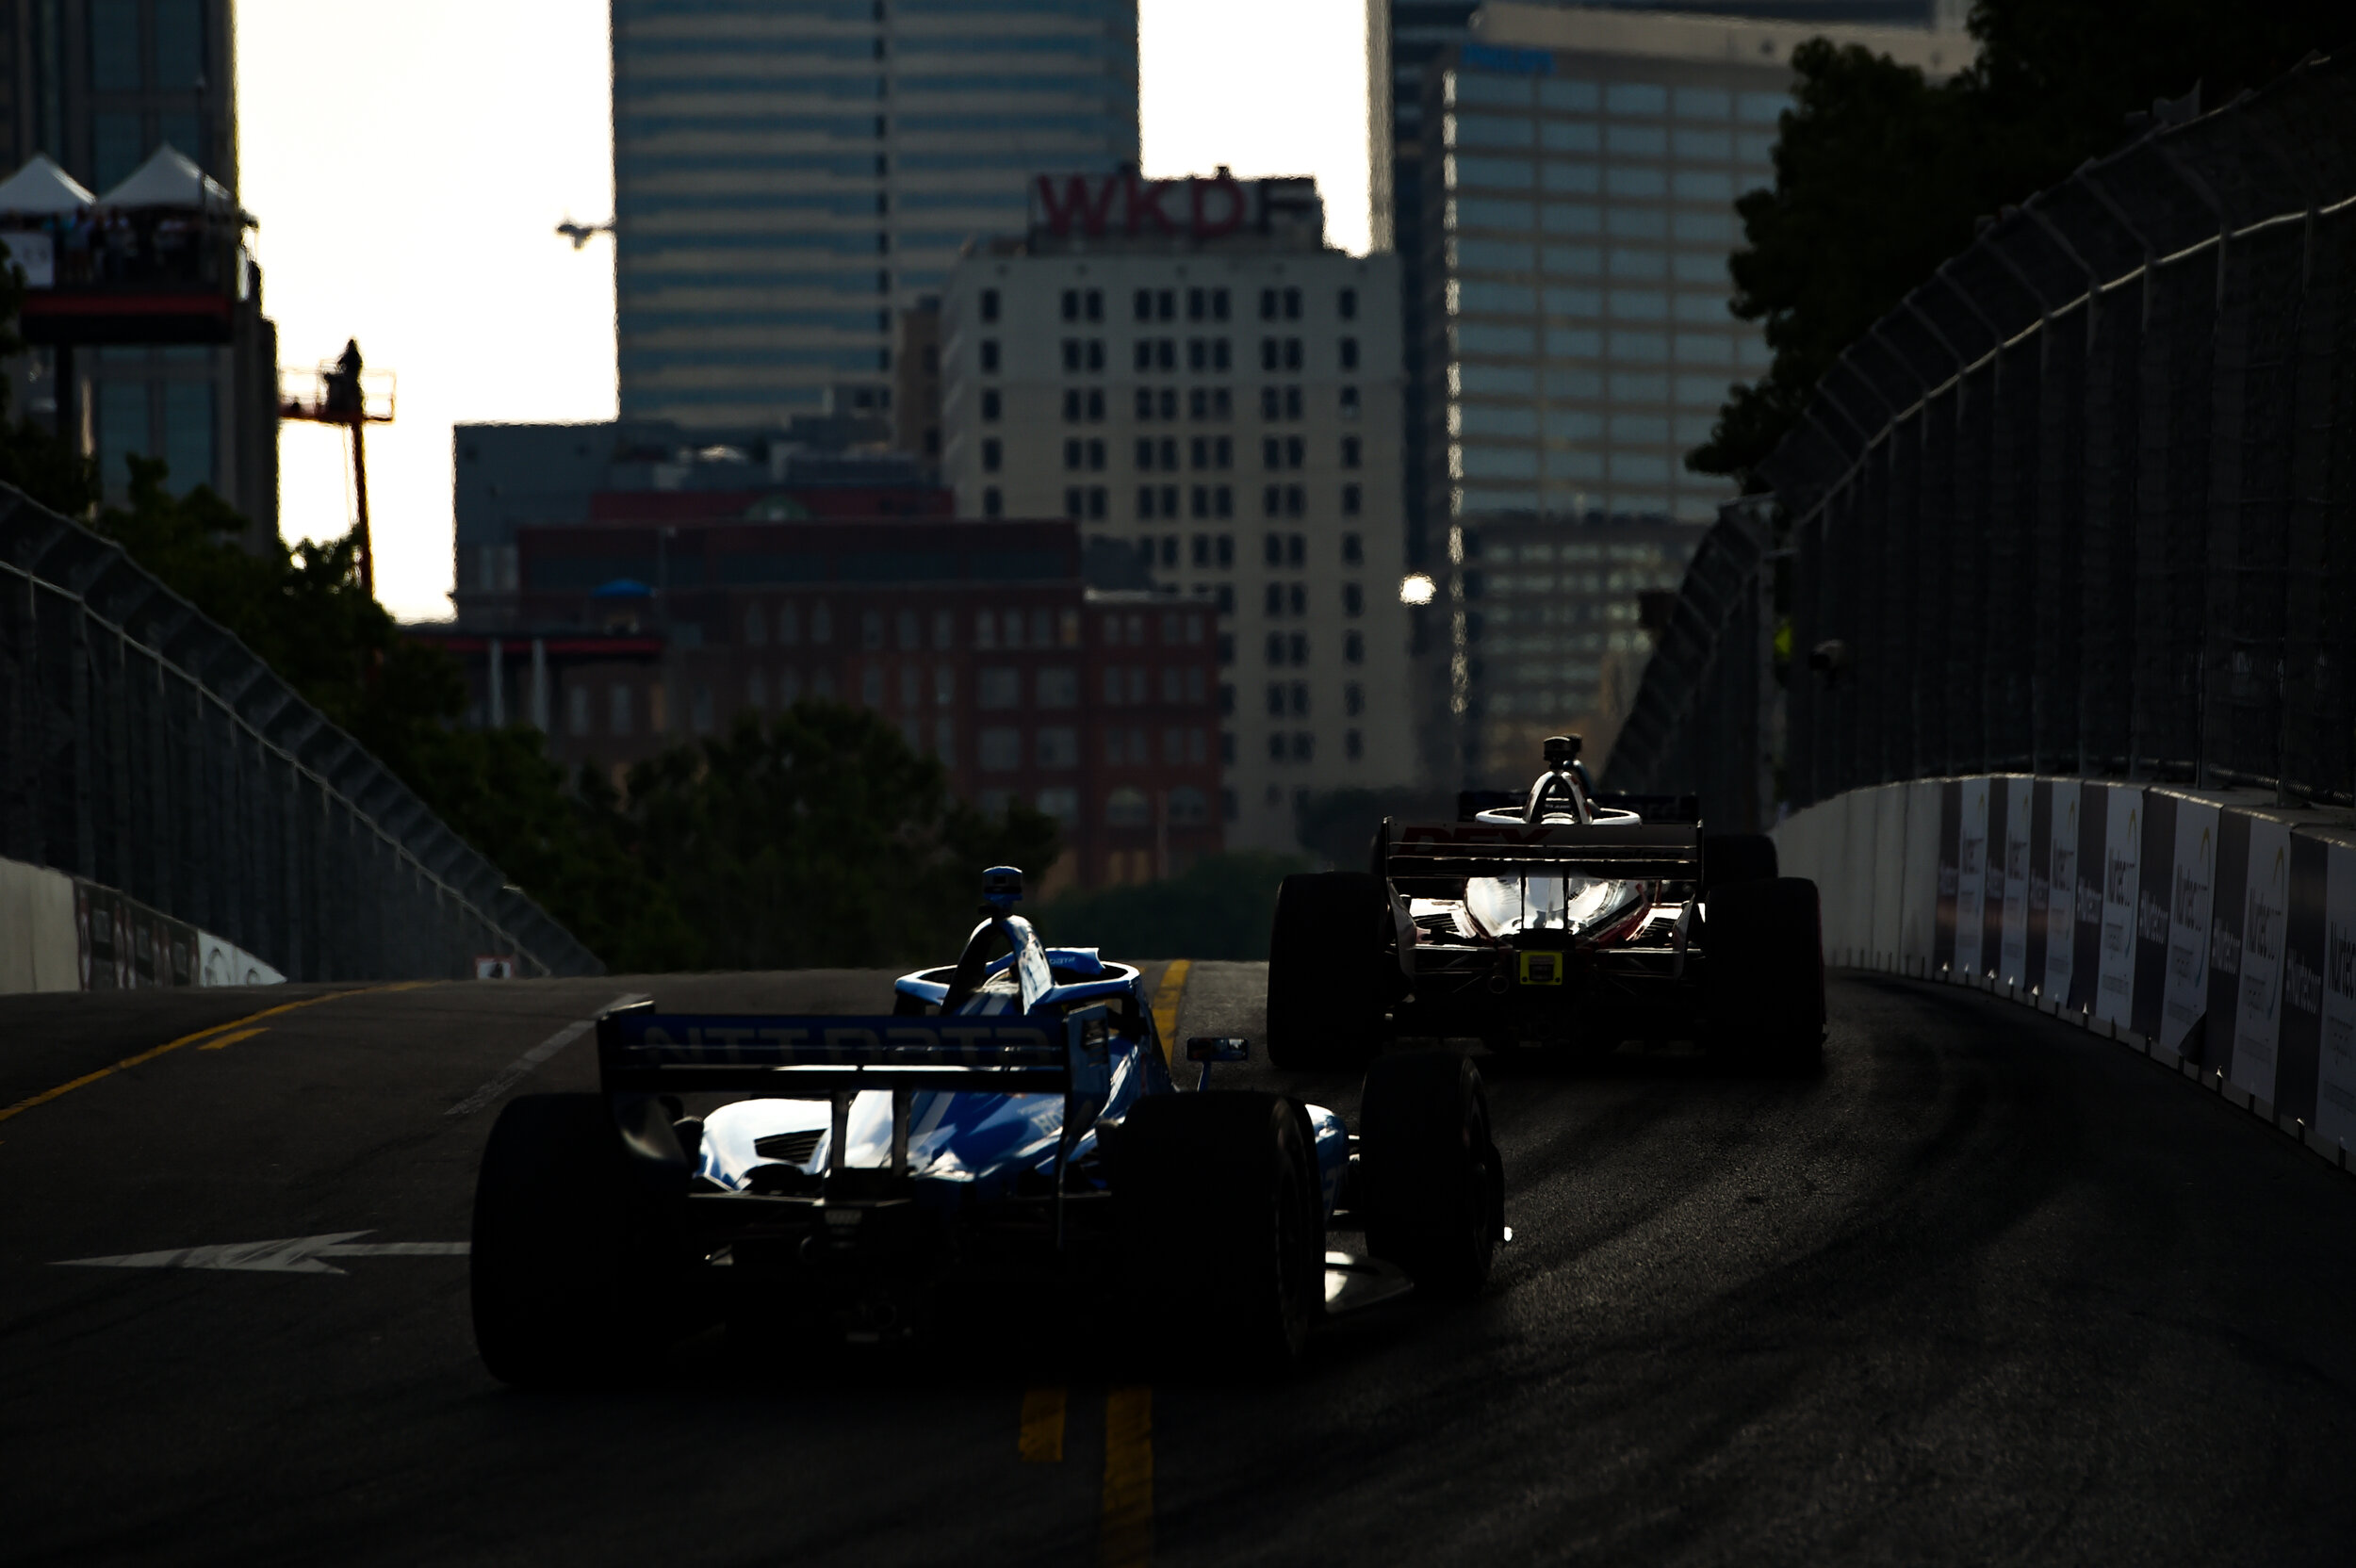 Sun setting during the 2021 Music City GP.